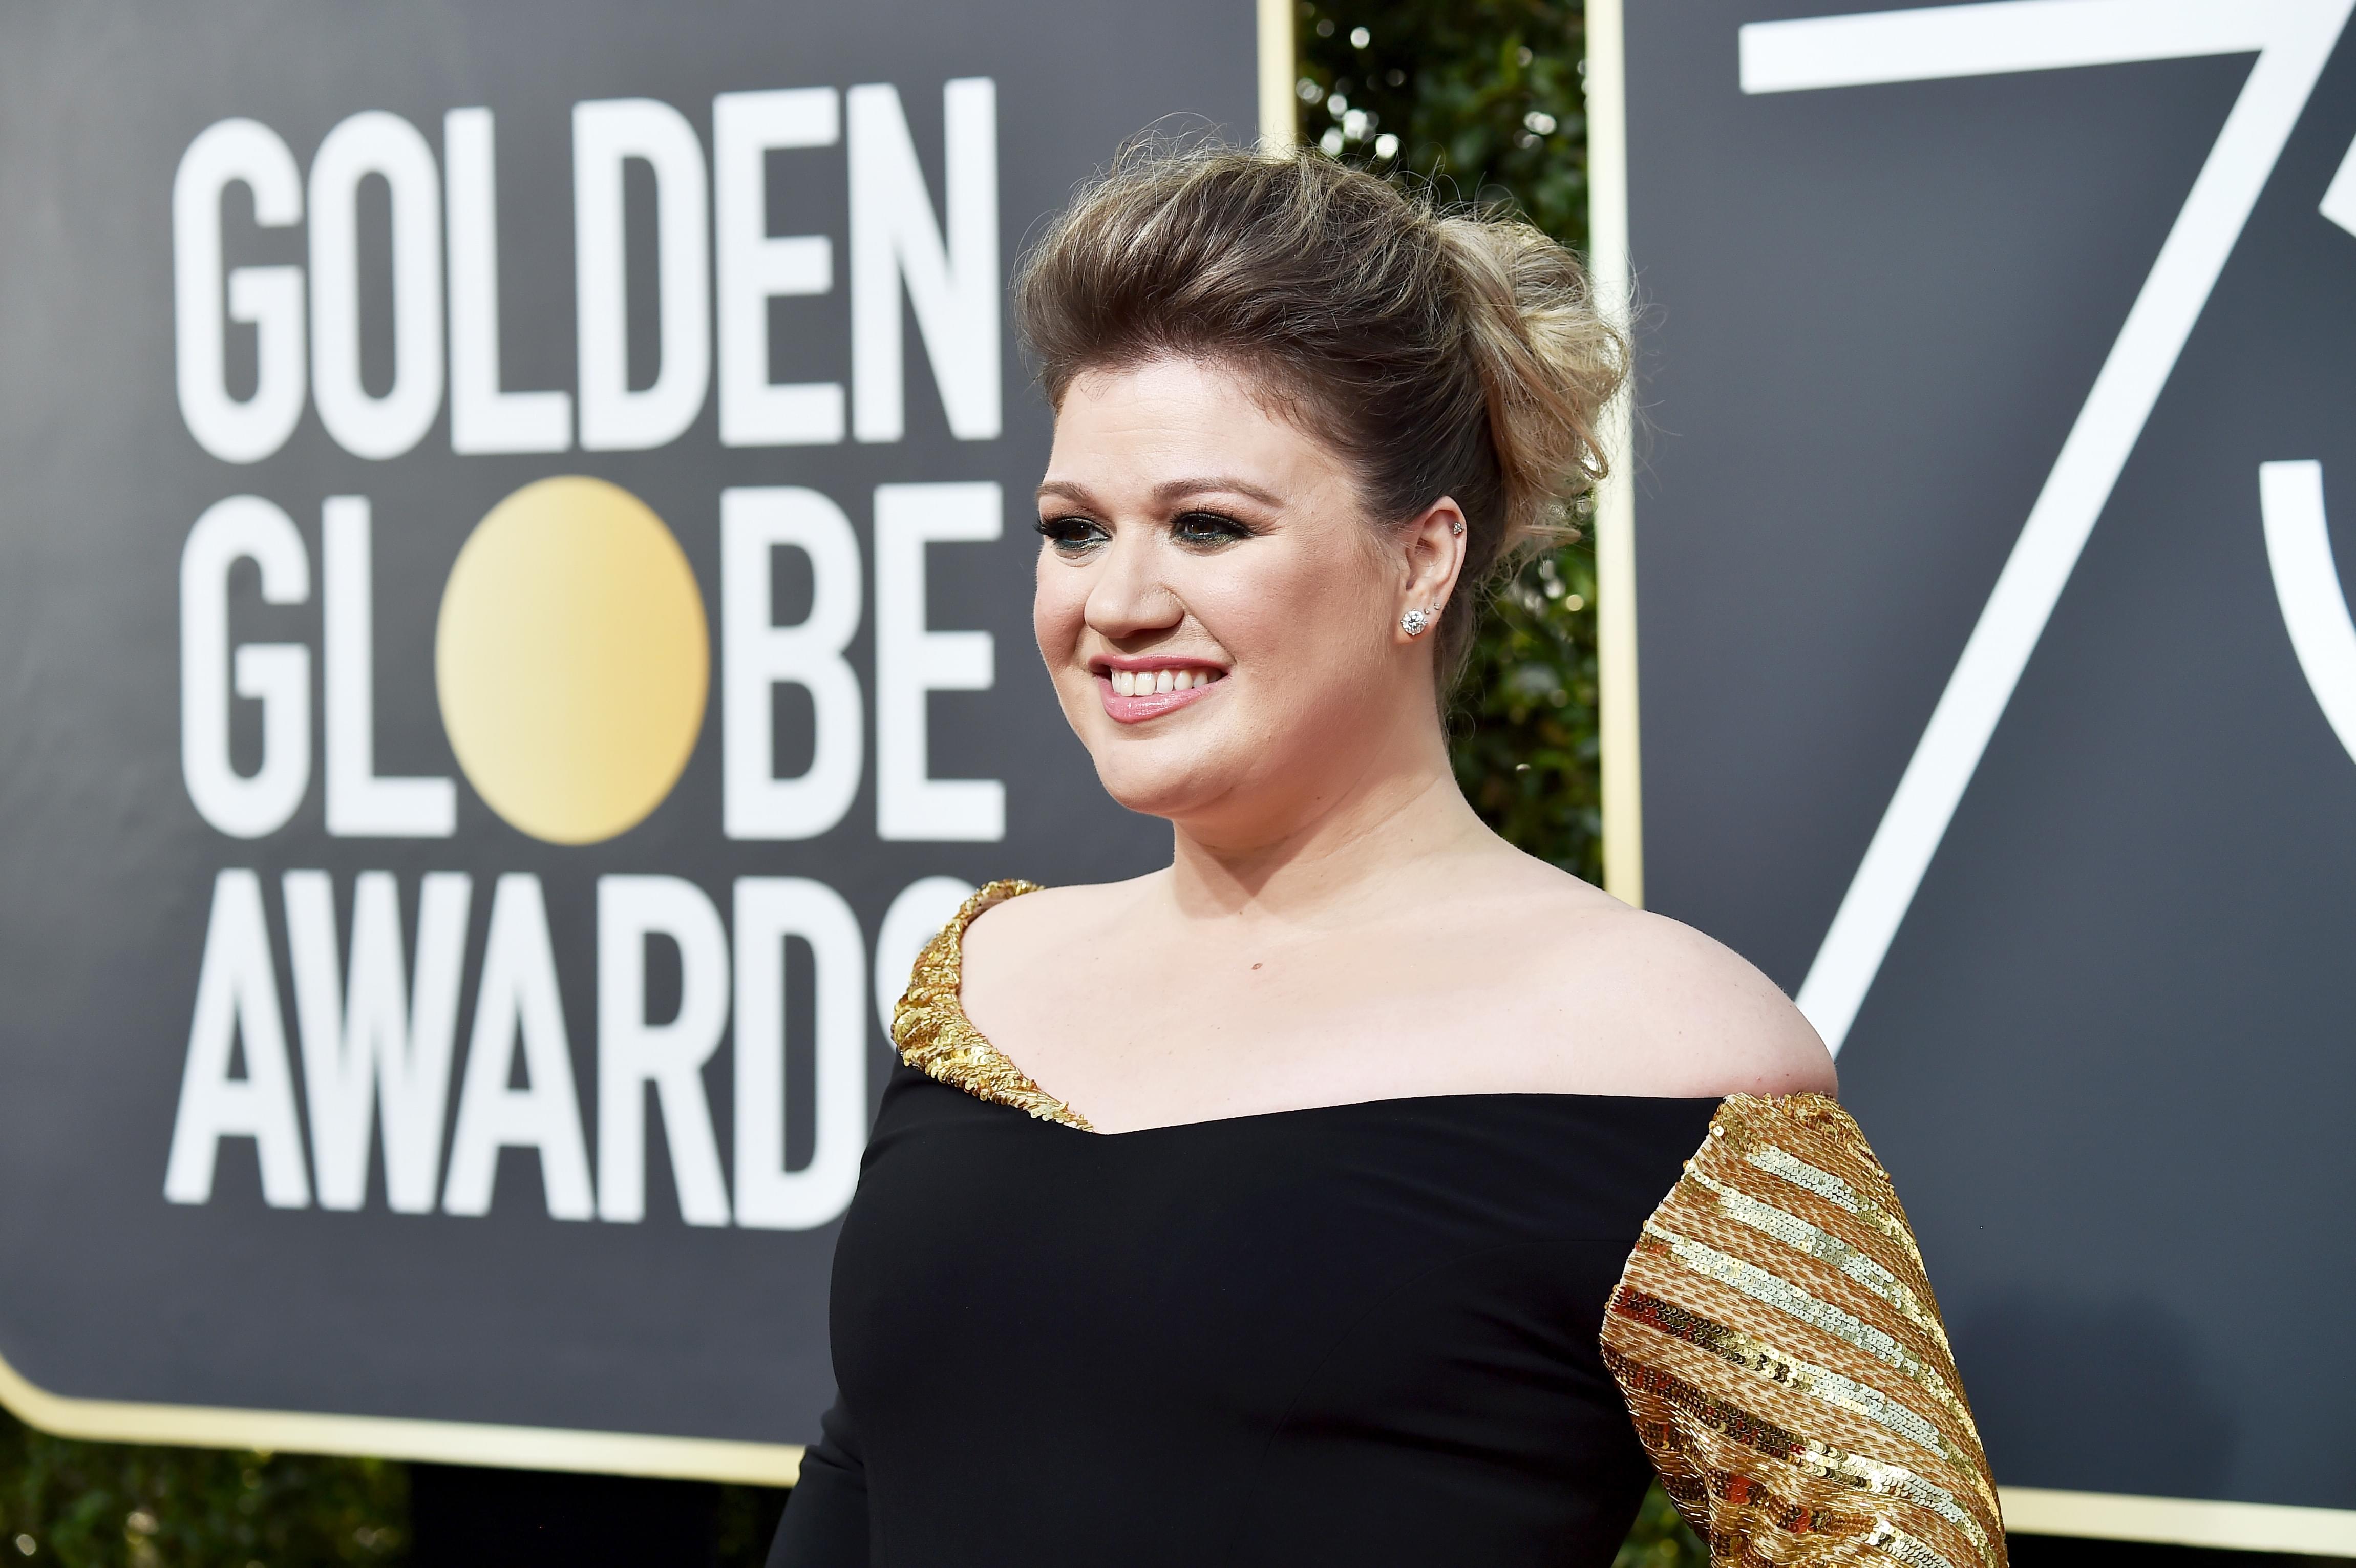 She’s Back! Kelly Clarkson Will Sing The National Anthem Before The Indianapolis 500